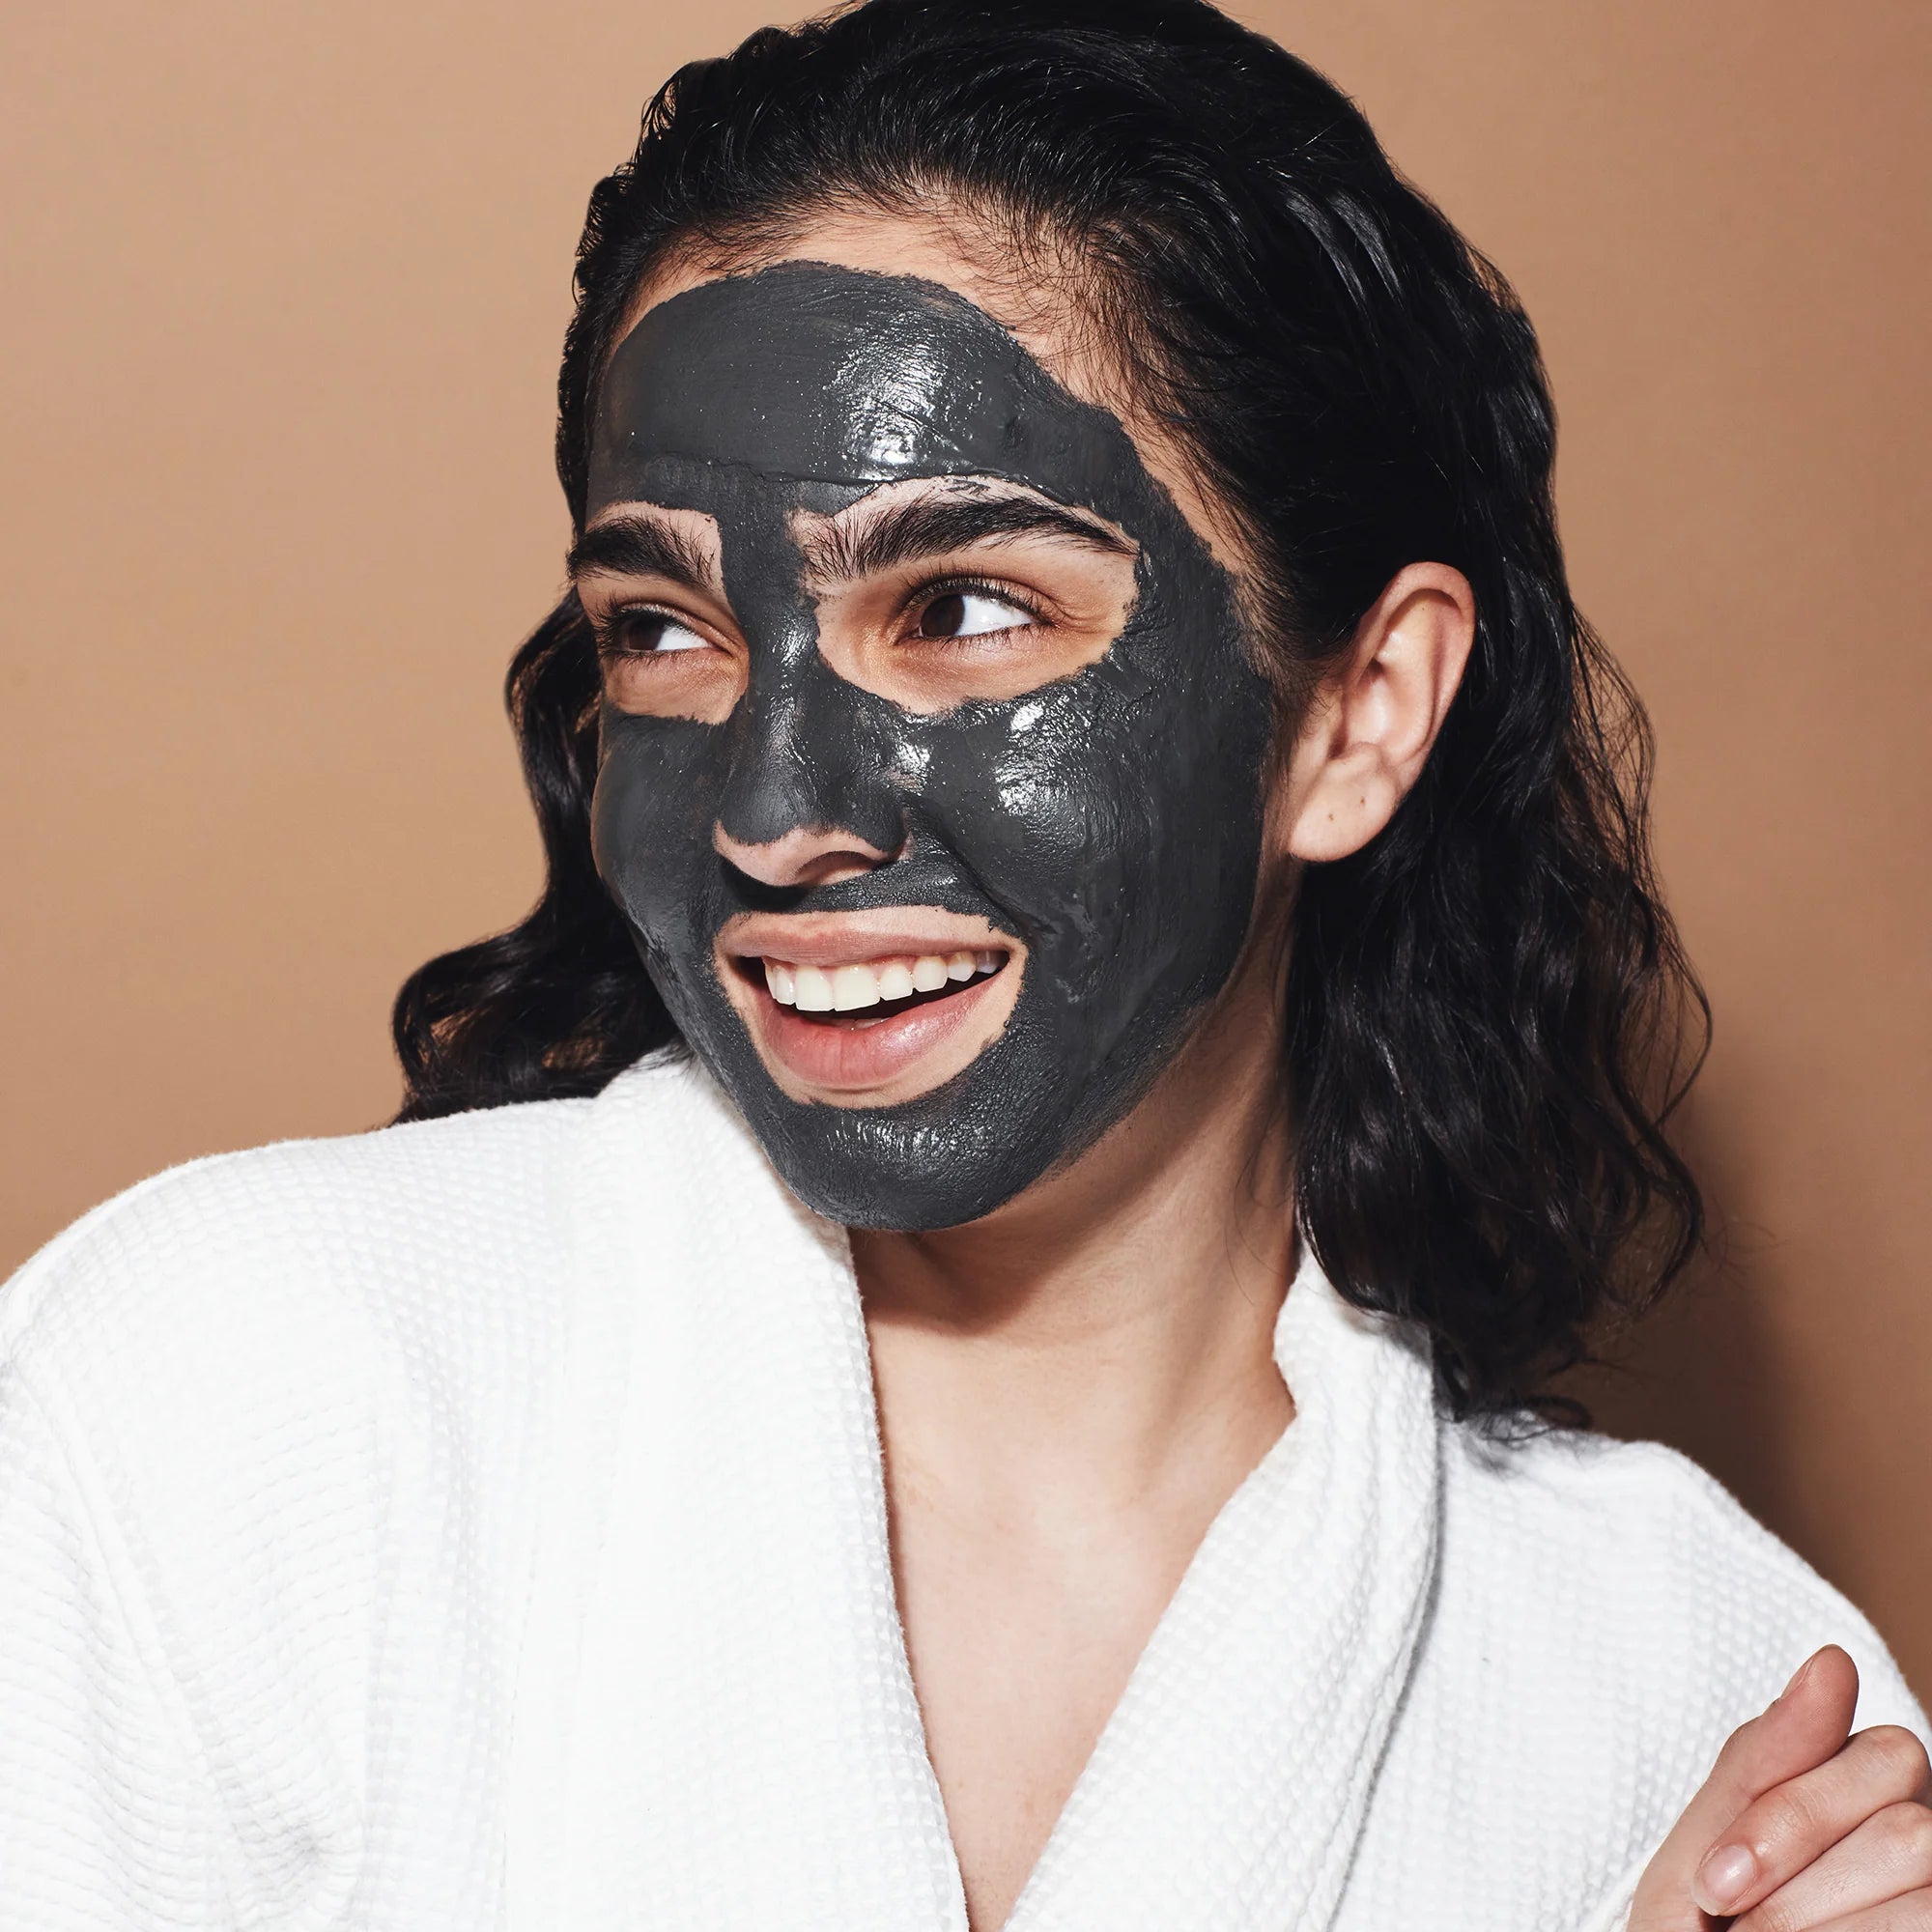 In the image, a woman smiles contentedly while indulging in a pampering session with a thick, creamy layer of dark grey Dead Sea mud mask covering her face. The mask's nourishing texture is visible as she looks away from the camera.